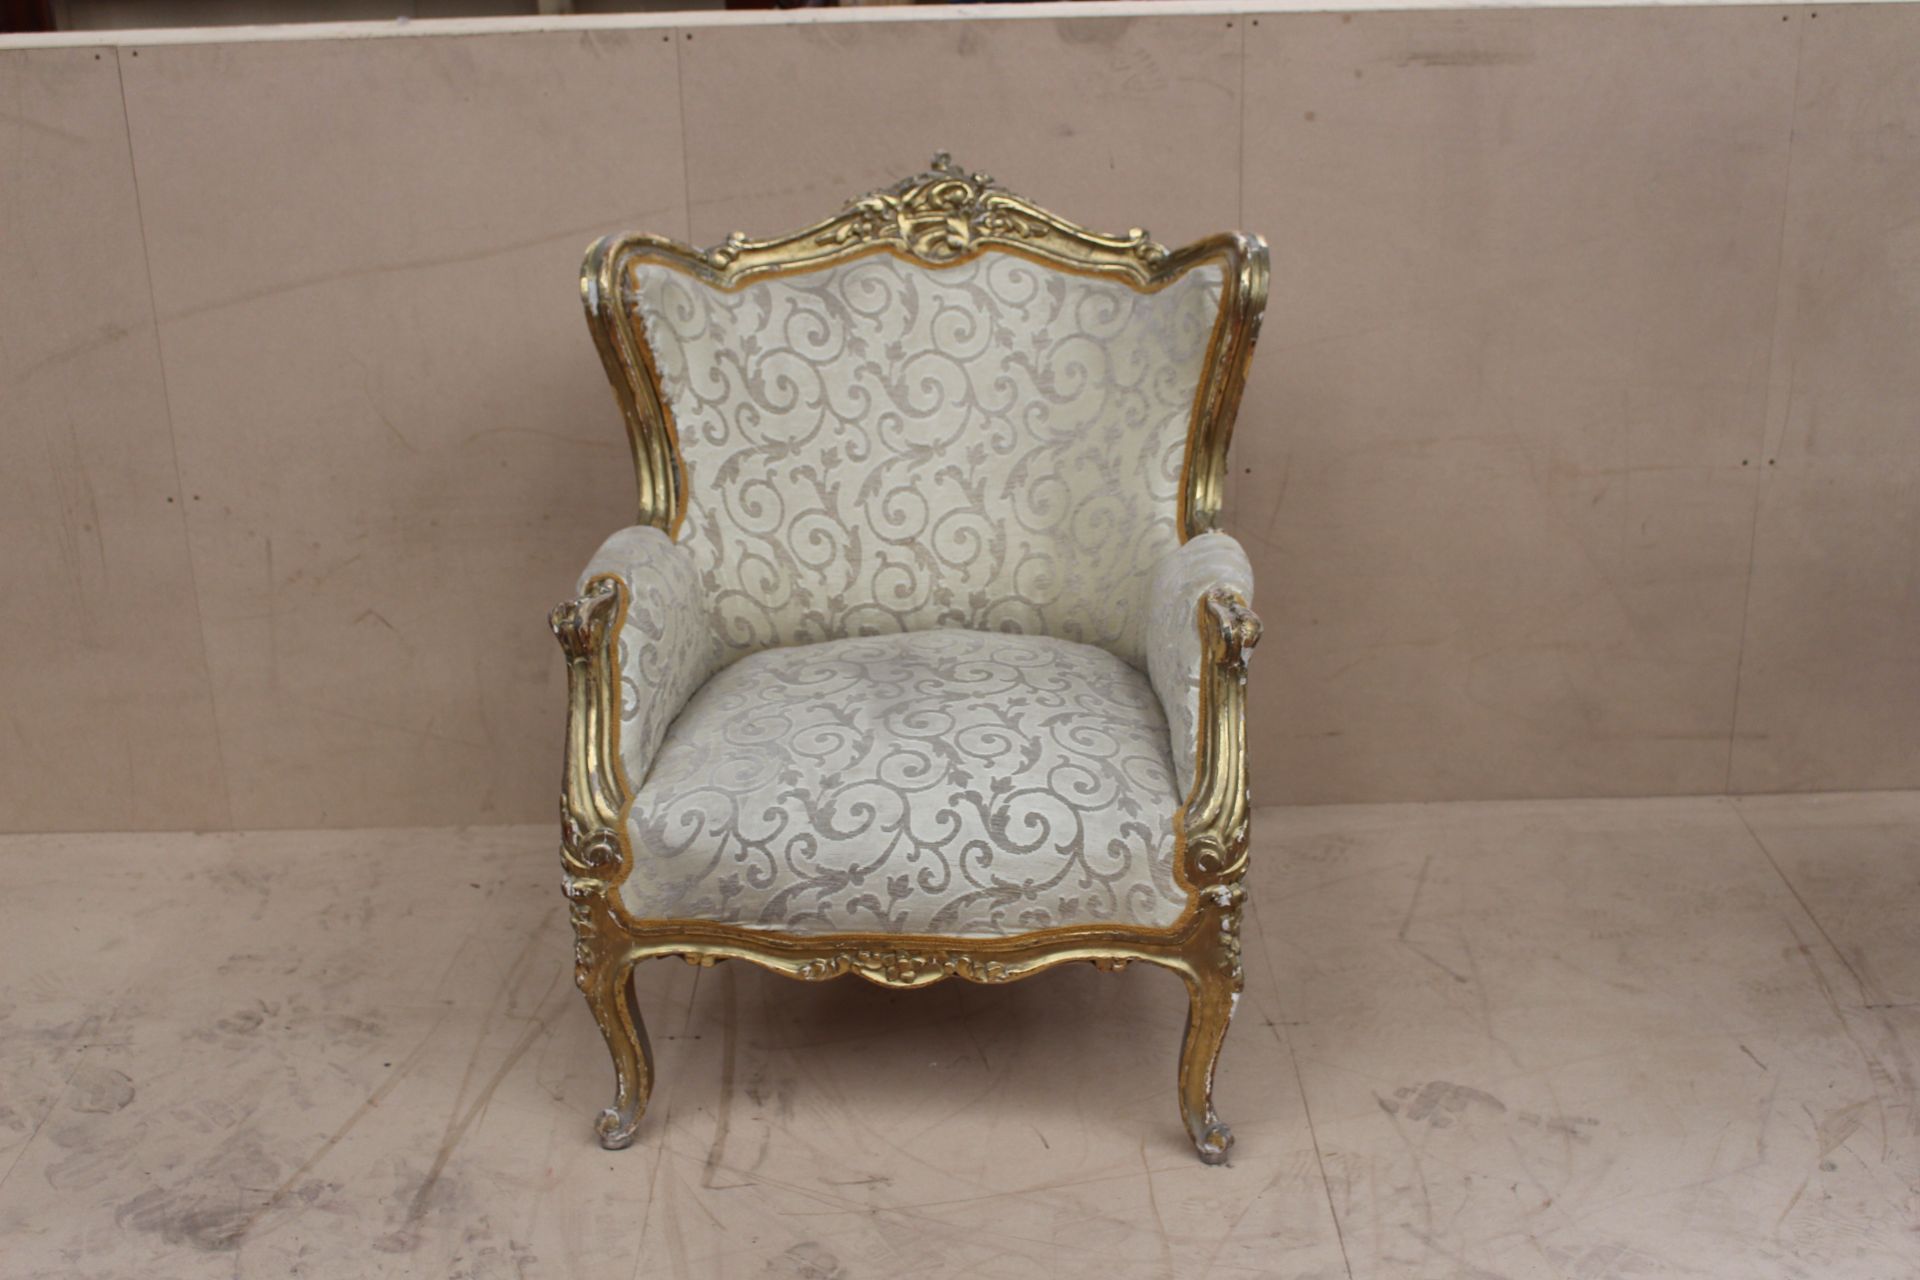 French ivory and gold thrown chair        H:125CM W:75 D:65CM - Image 2 of 2